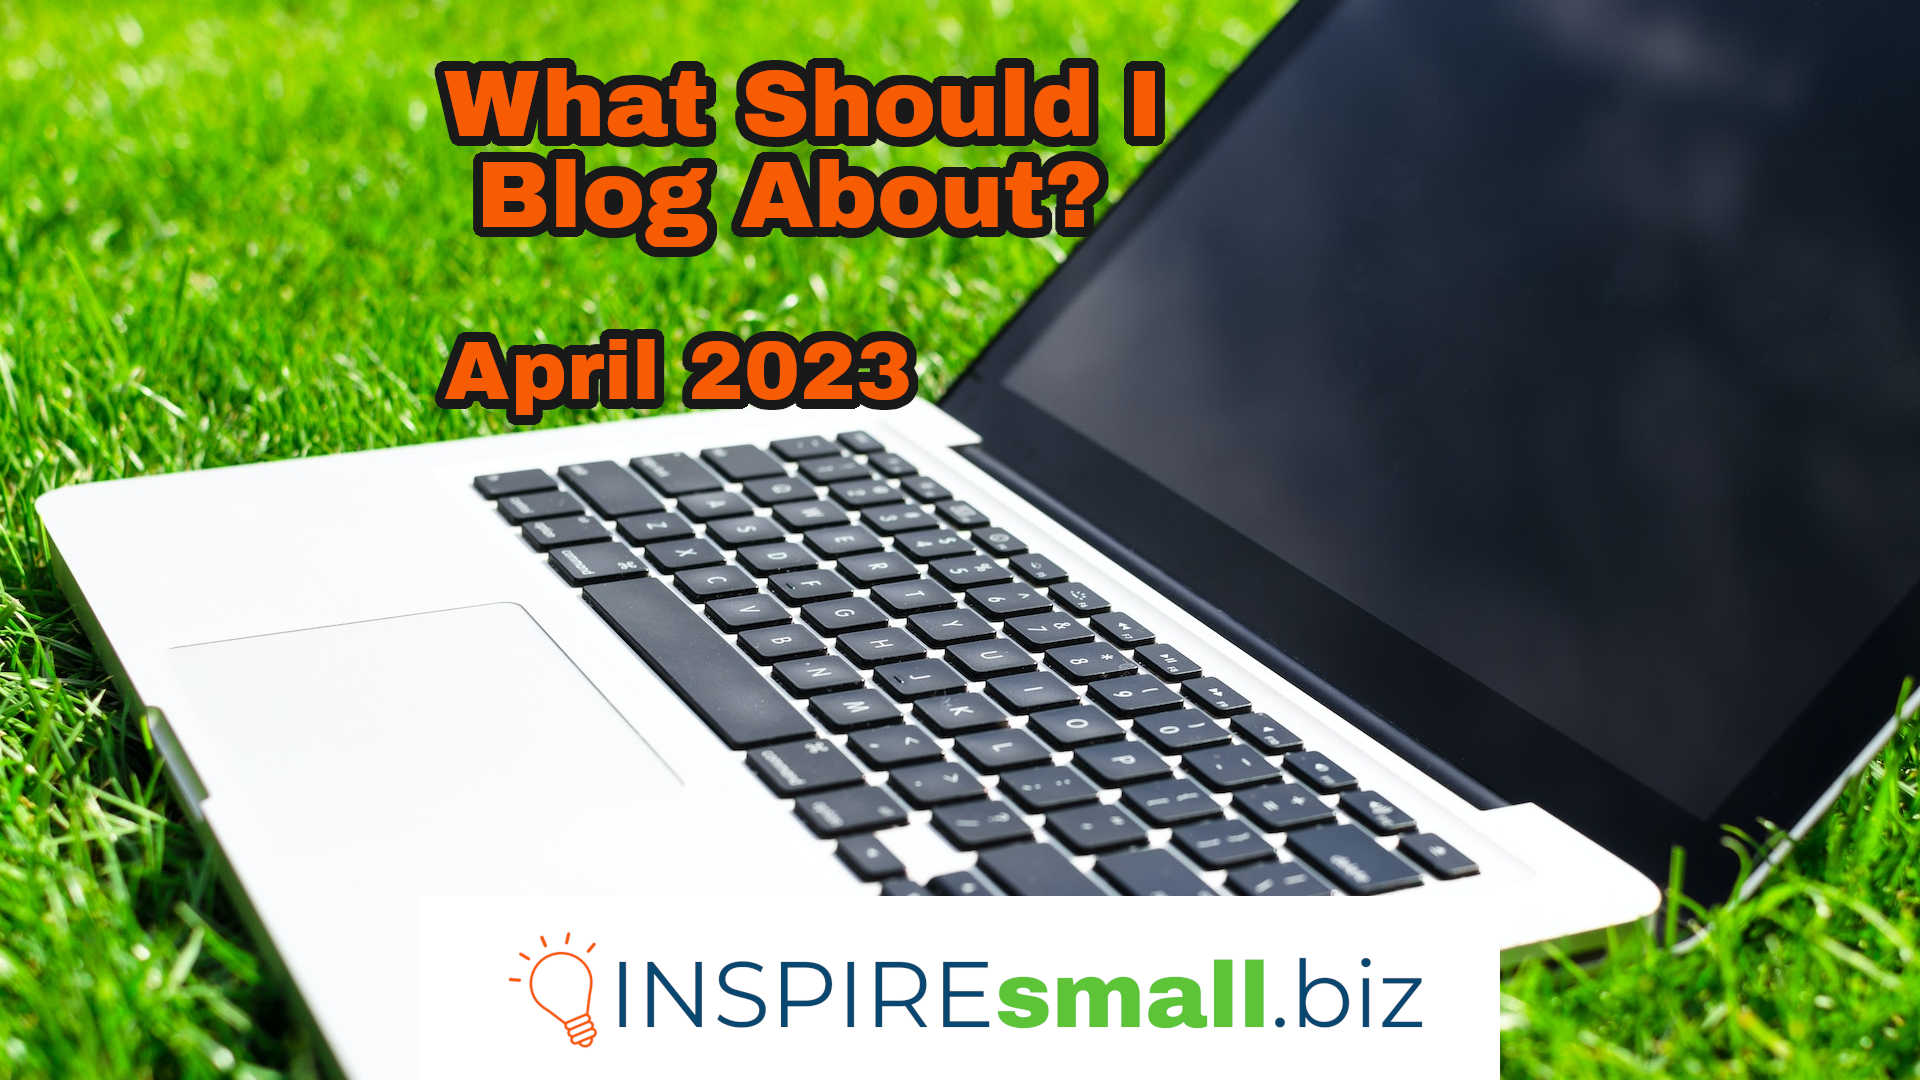 What Should I Blog About? April 2023, from INSPIREsmall.biz